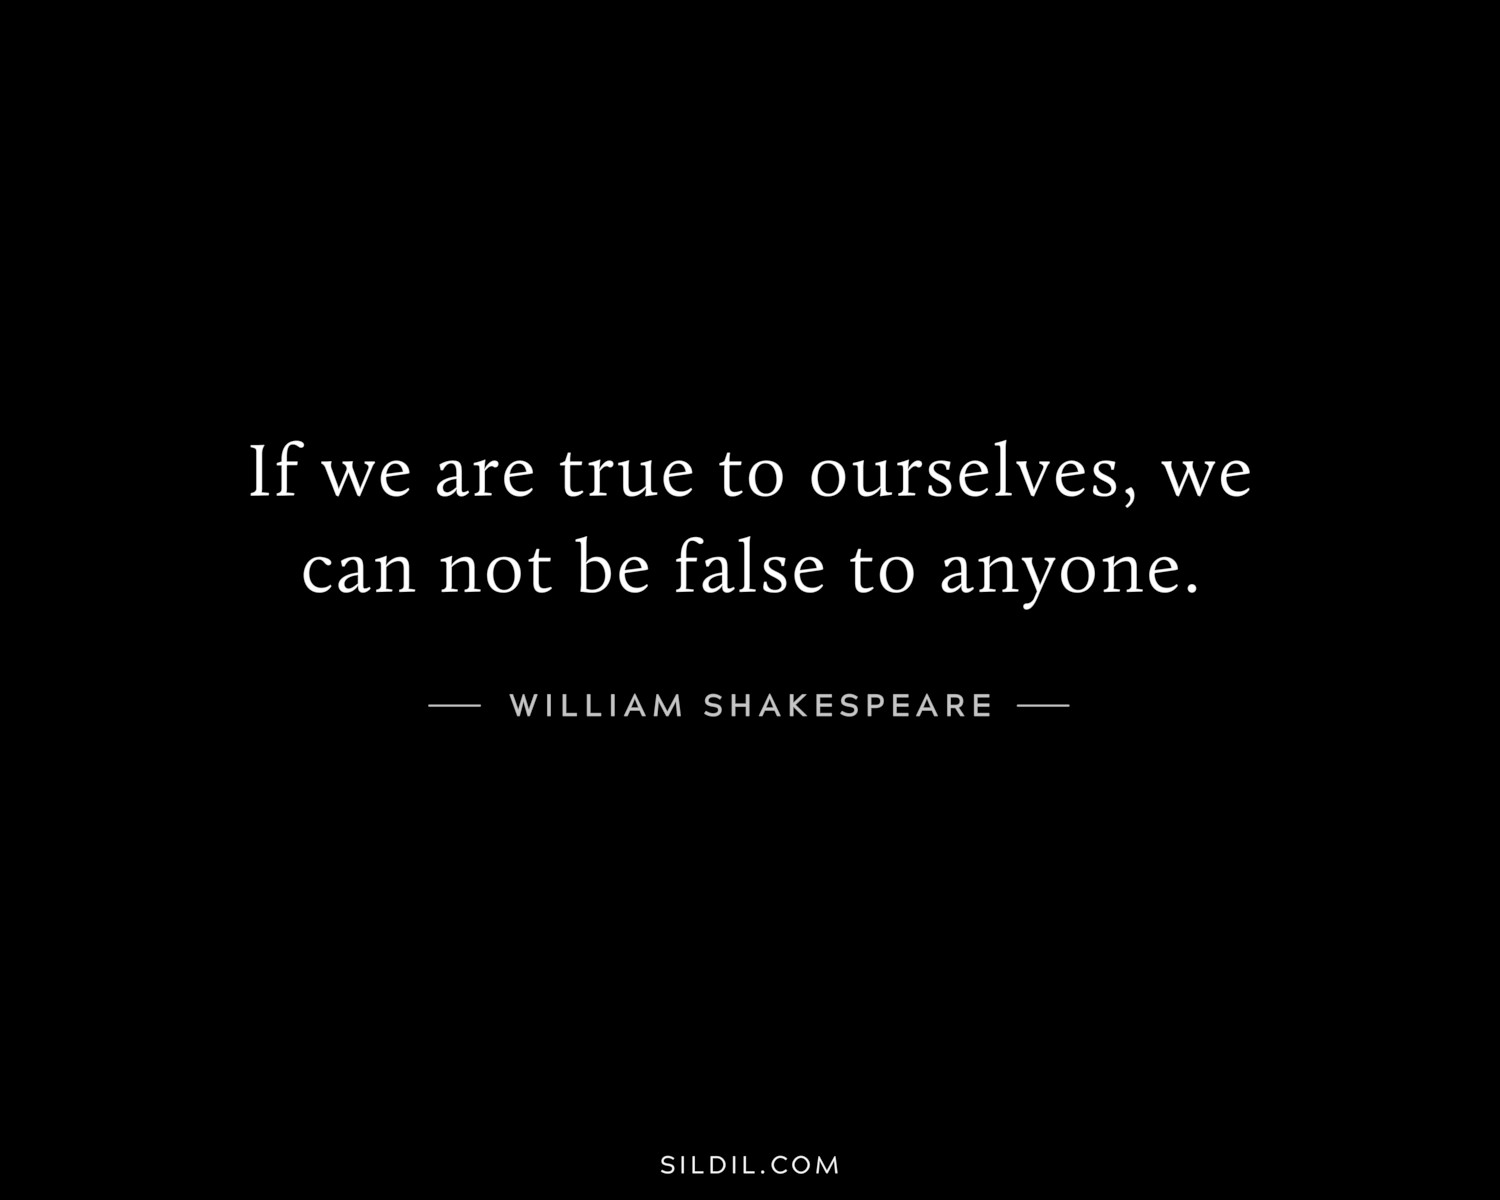 If we are true to ourselves, we can not be false to anyone.